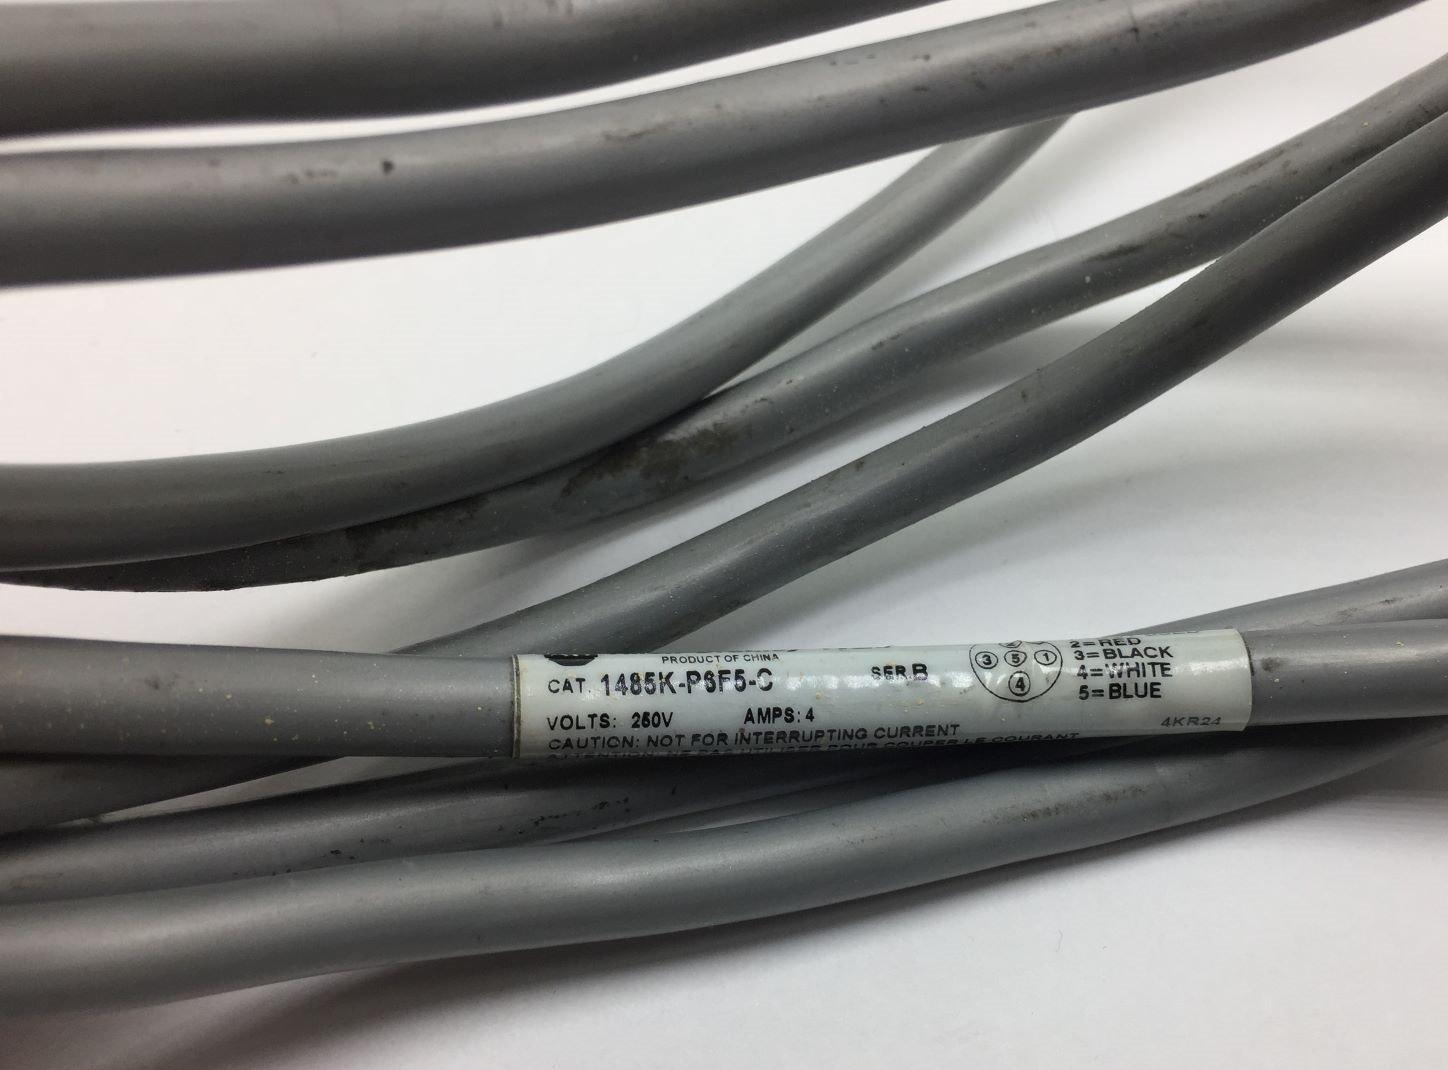   1485K-P6F5-C SER.B DEVICENET CABLE TESTED 